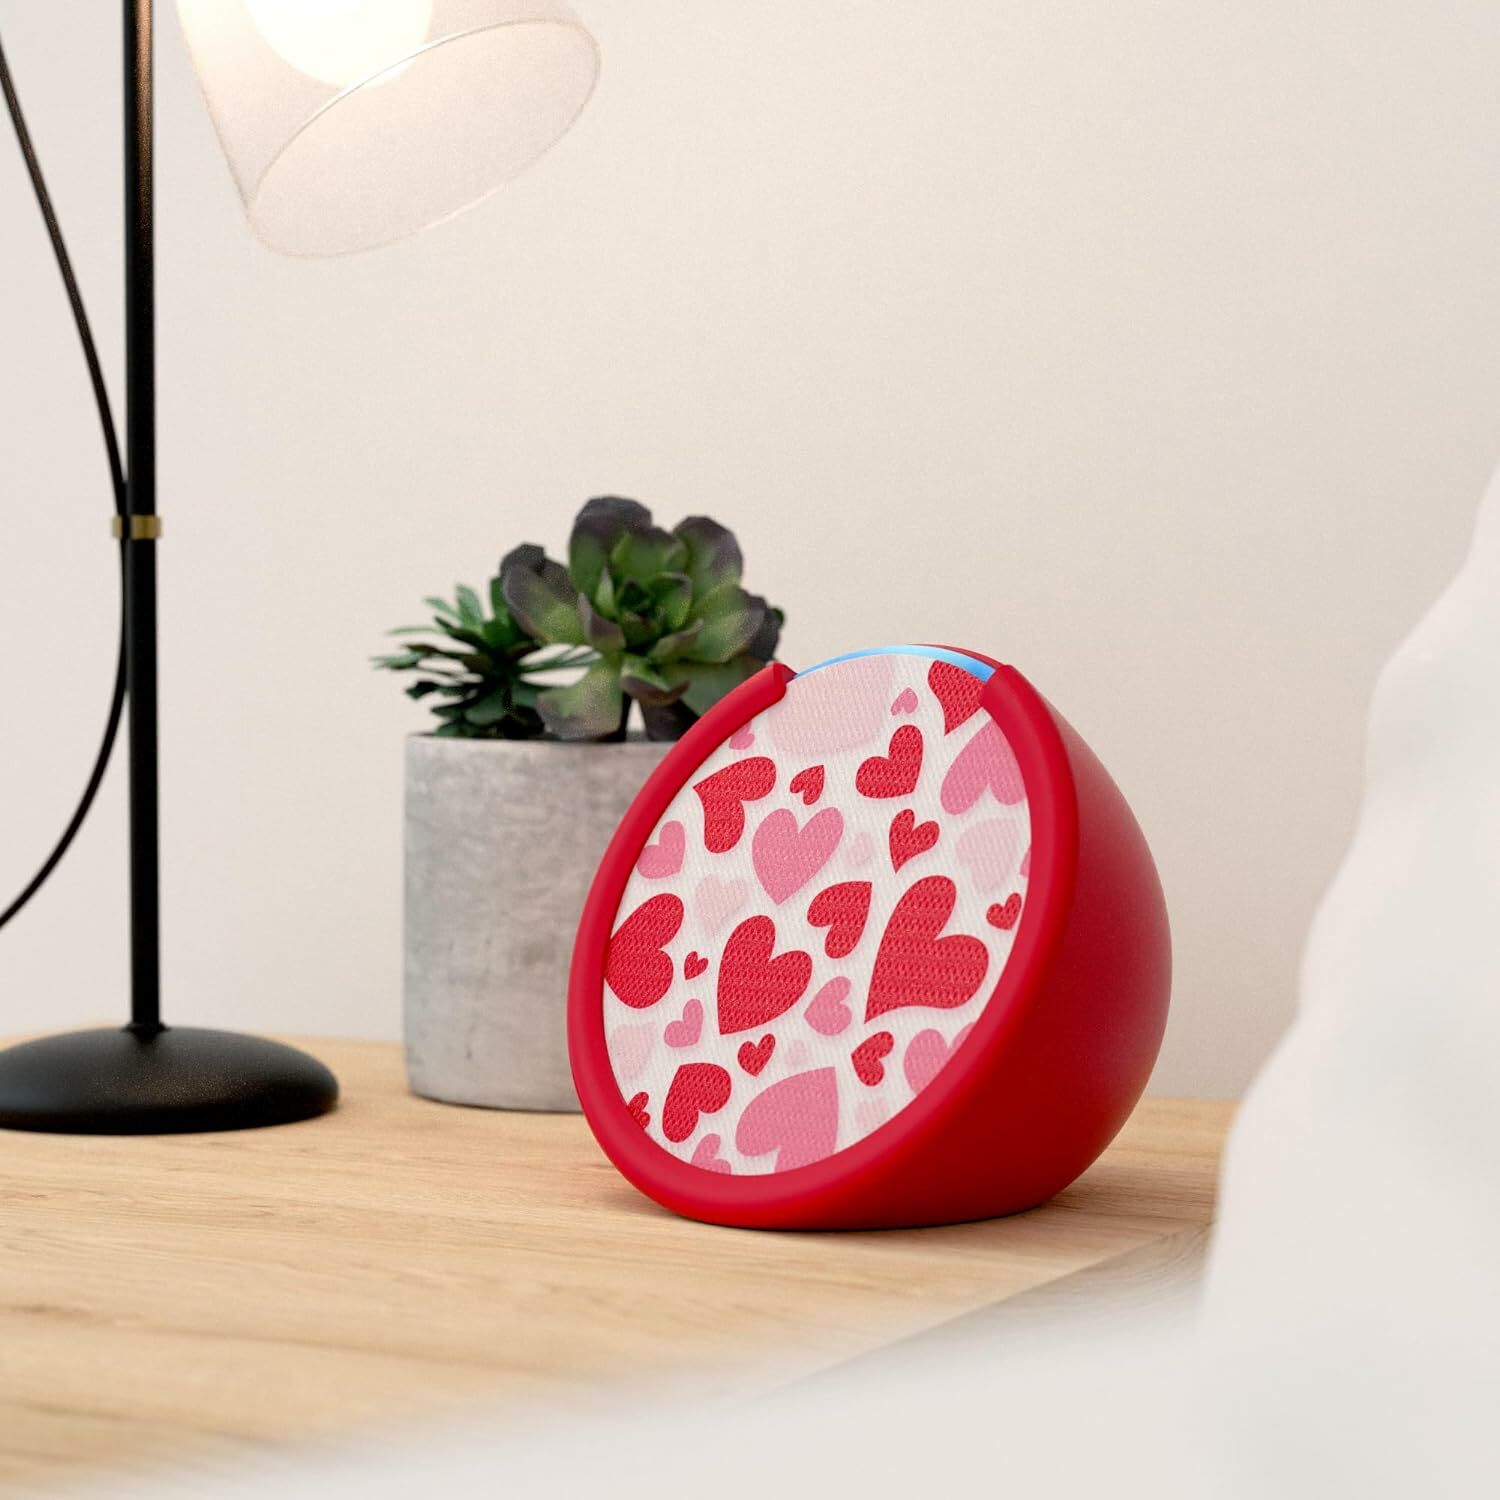 Amazon Echo Pop with red sleeve and hearts faceplate